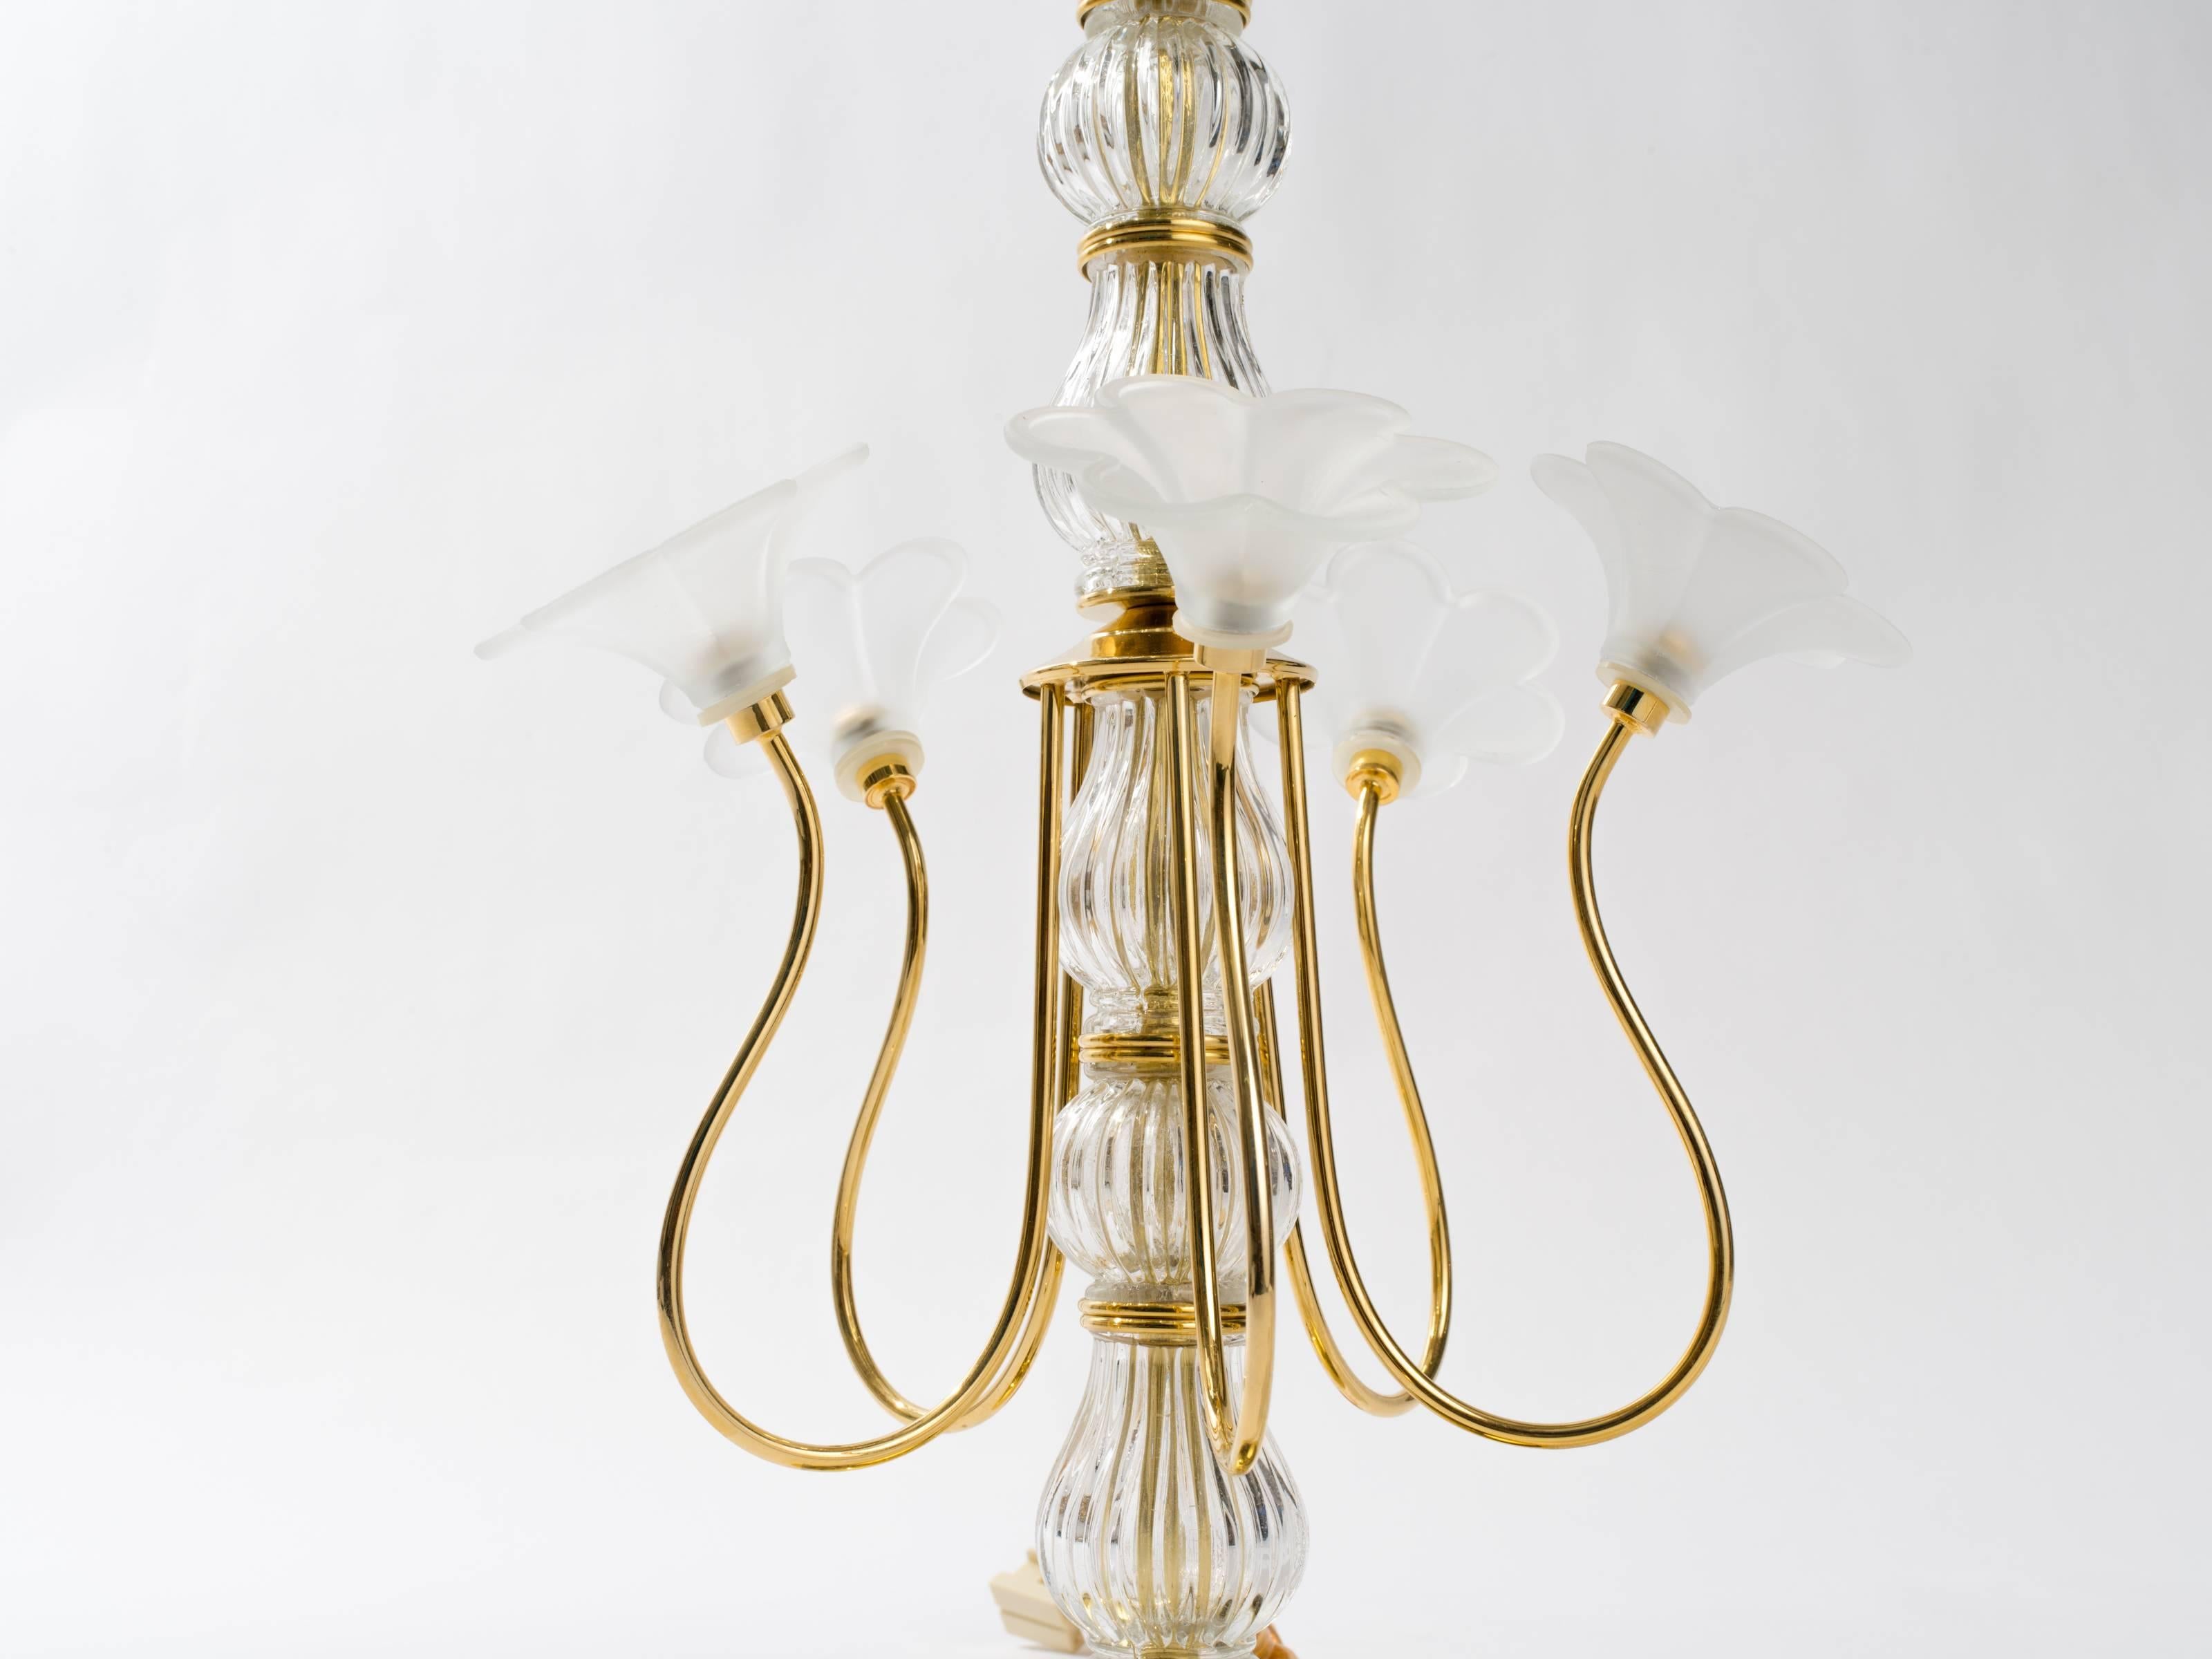 Italian Floral Glass Lamps 3